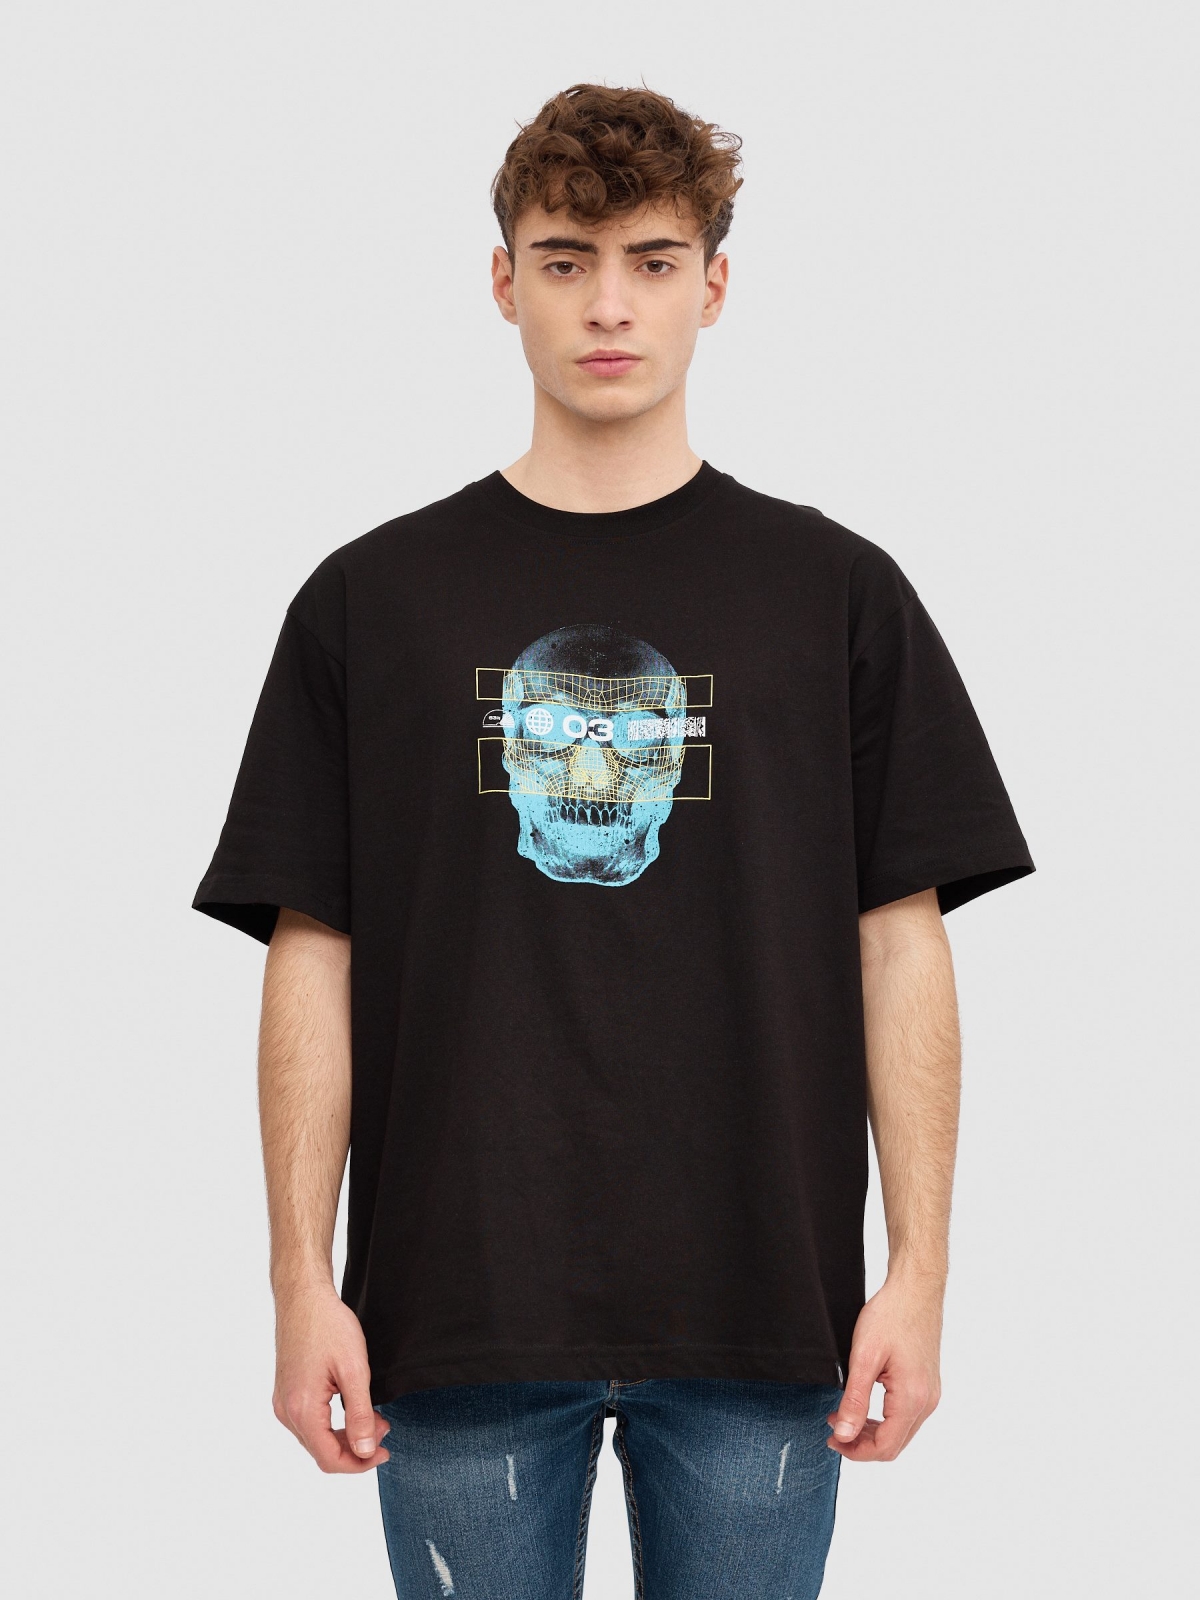 Skull tech t-shirt black middle front view